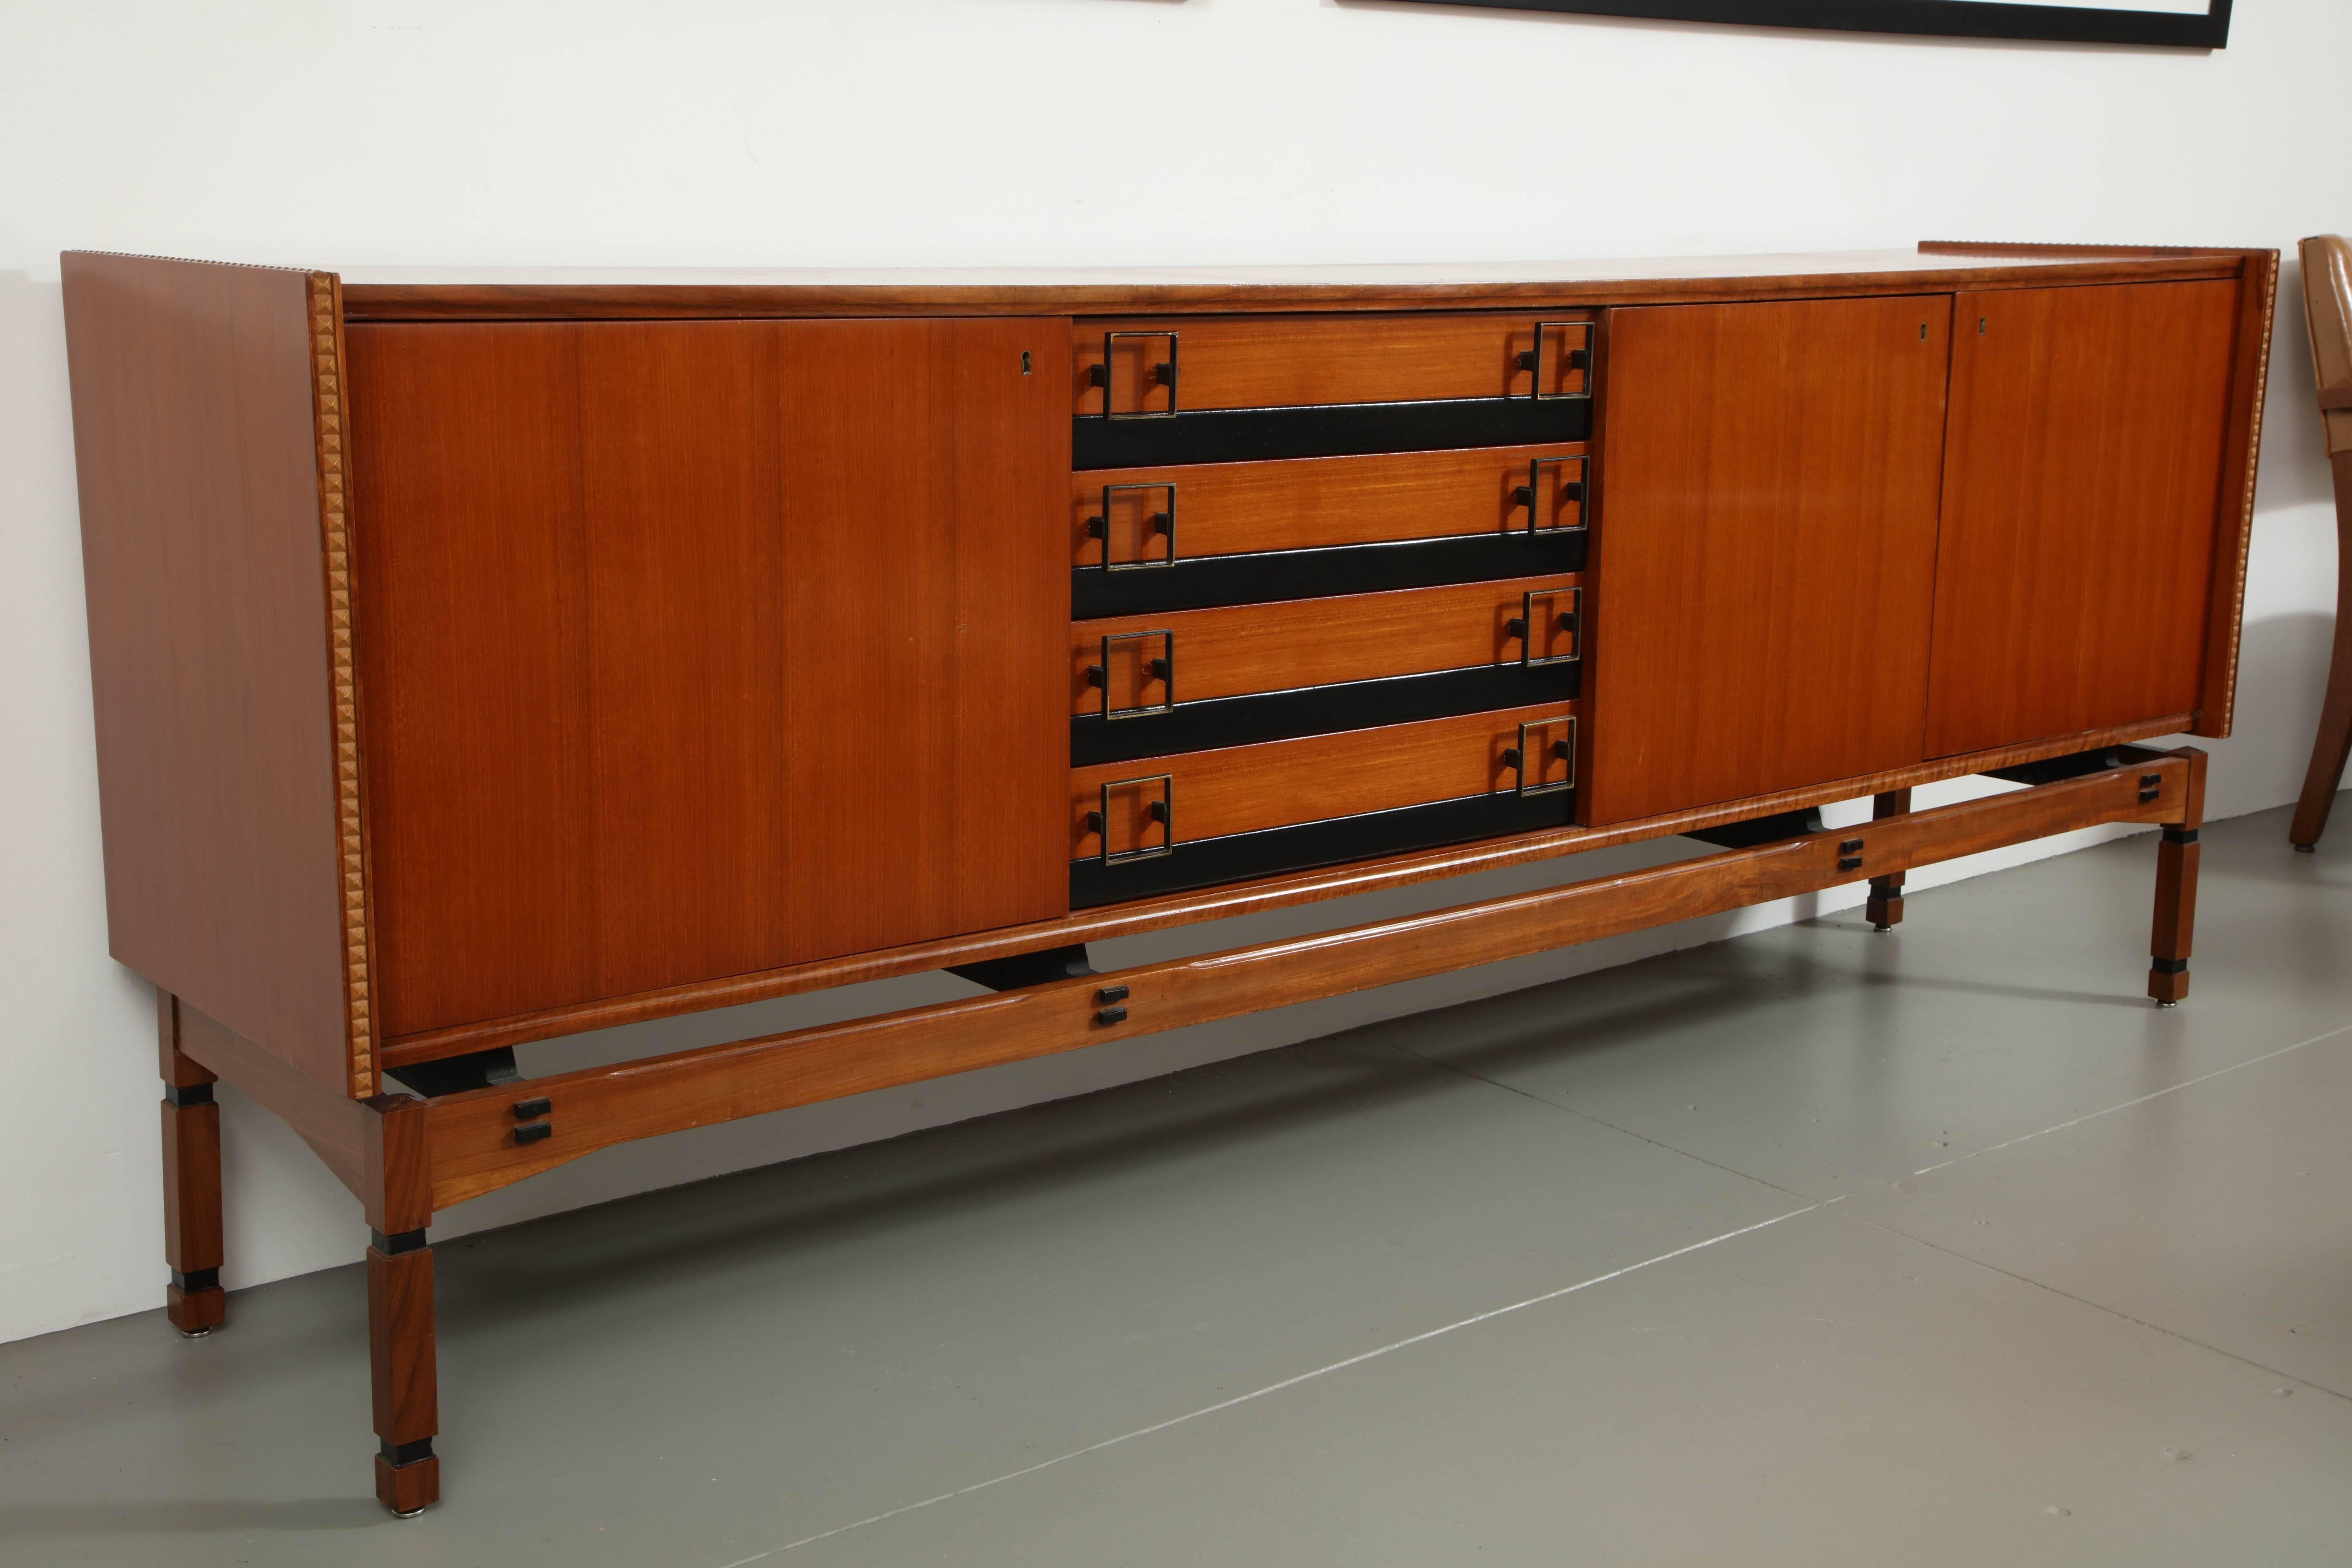 Mid-20th century teak sideboard, three doors, ebonized banding on four drawers, base joined by square legs

Italian, circa 1960.